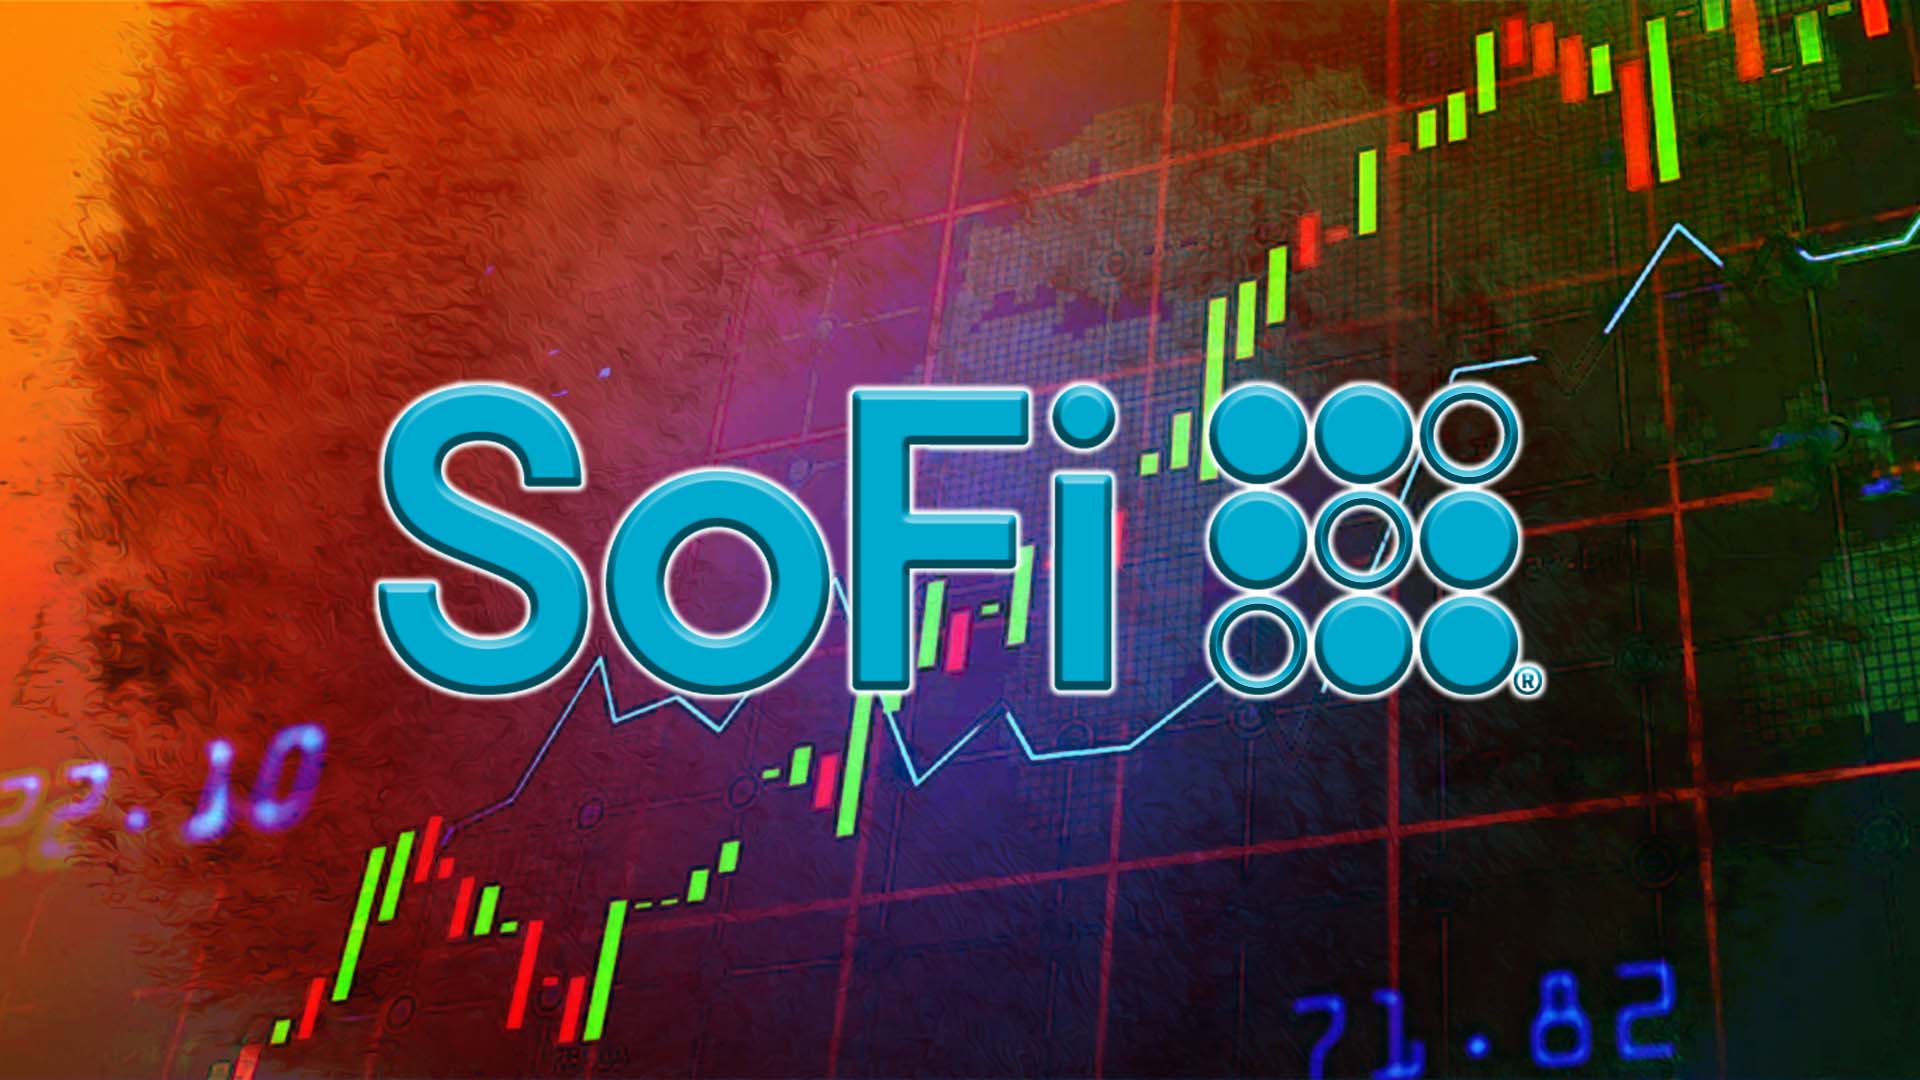 Sofi Stock Price soars 11%; Is the up-move a beginning of a rally